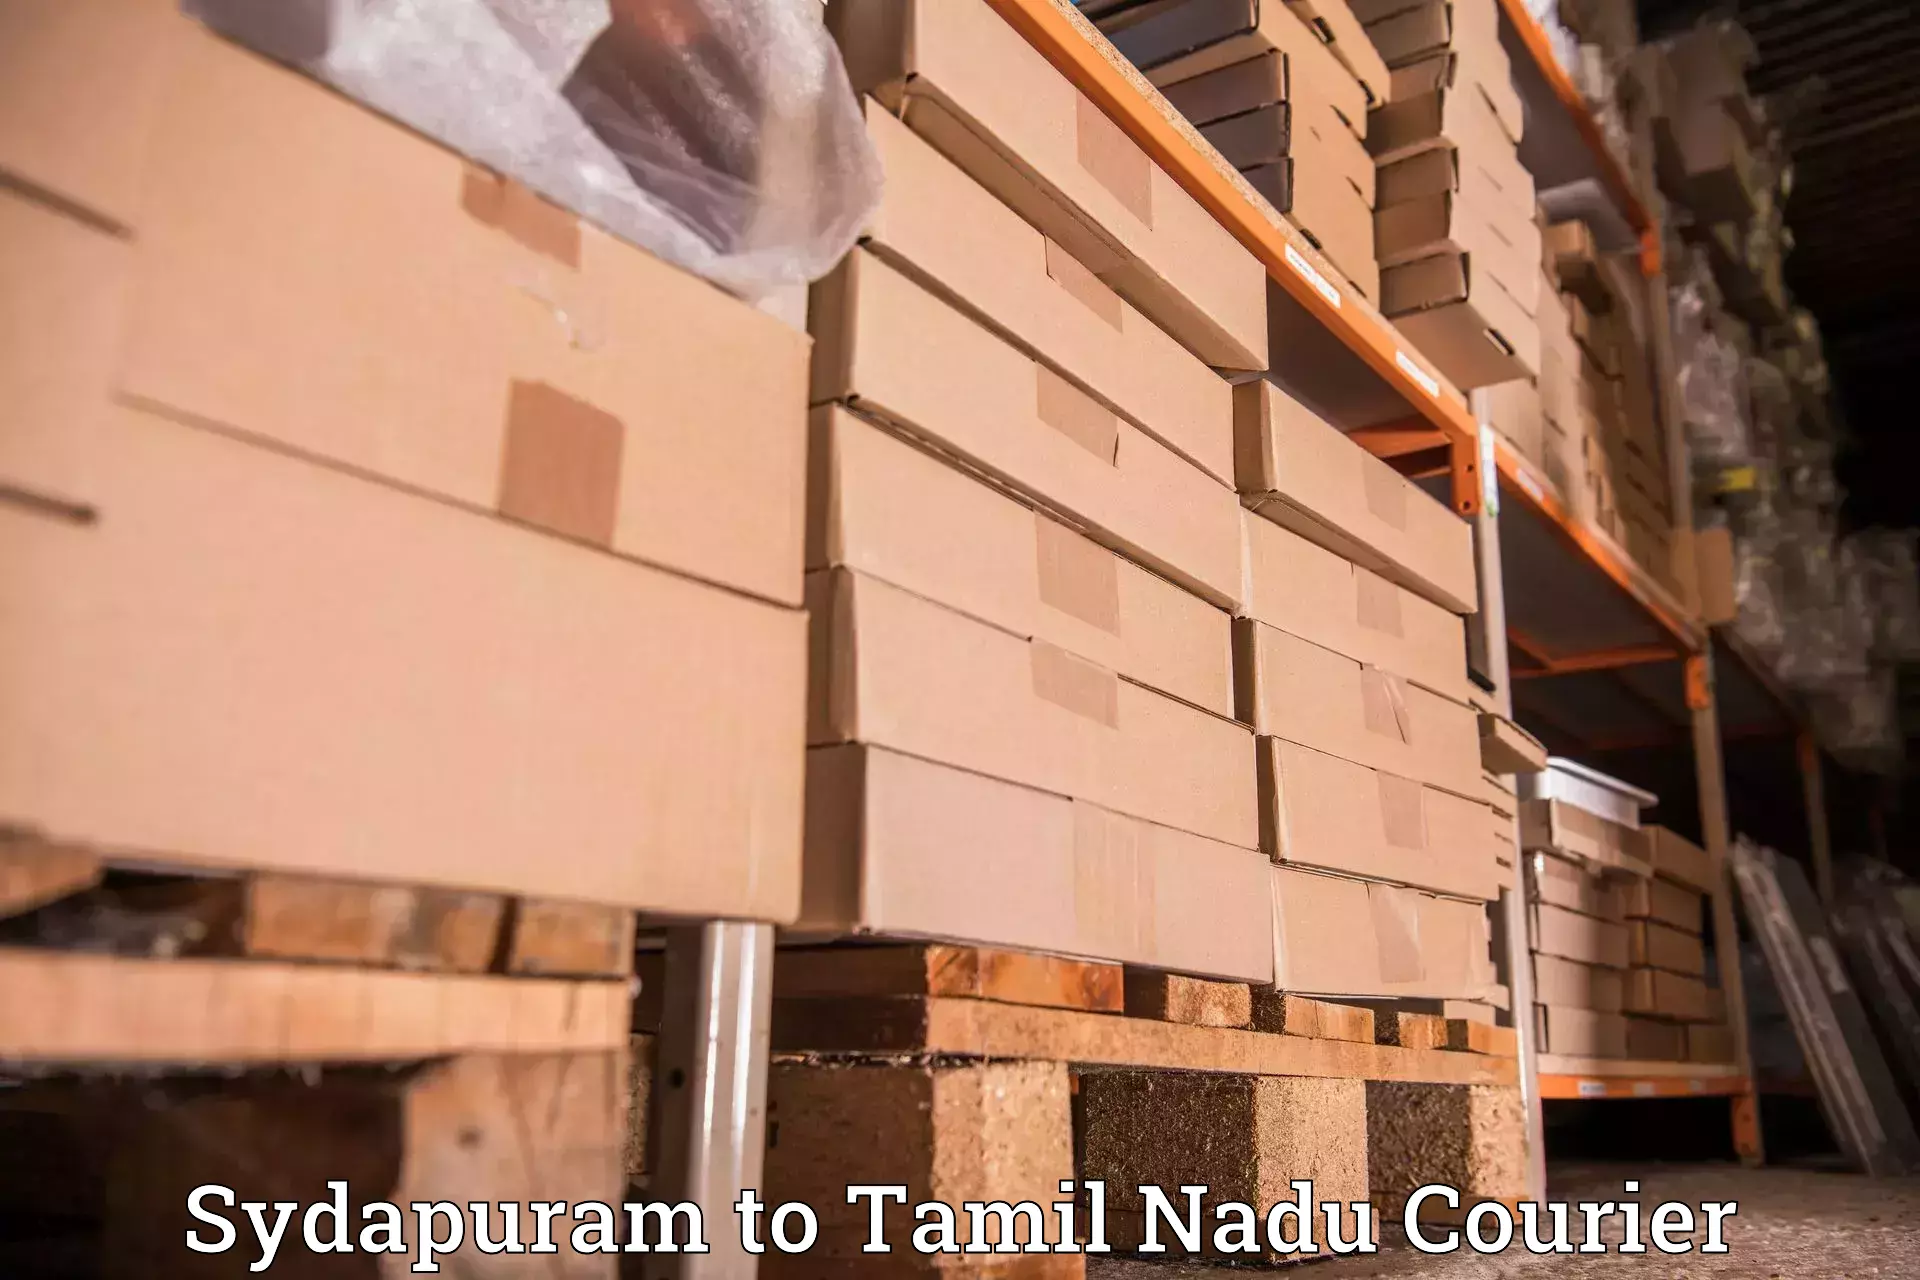 Courier service efficiency in Sydapuram to Sri Ramachandra Institute of Higher Education and Research Chennai